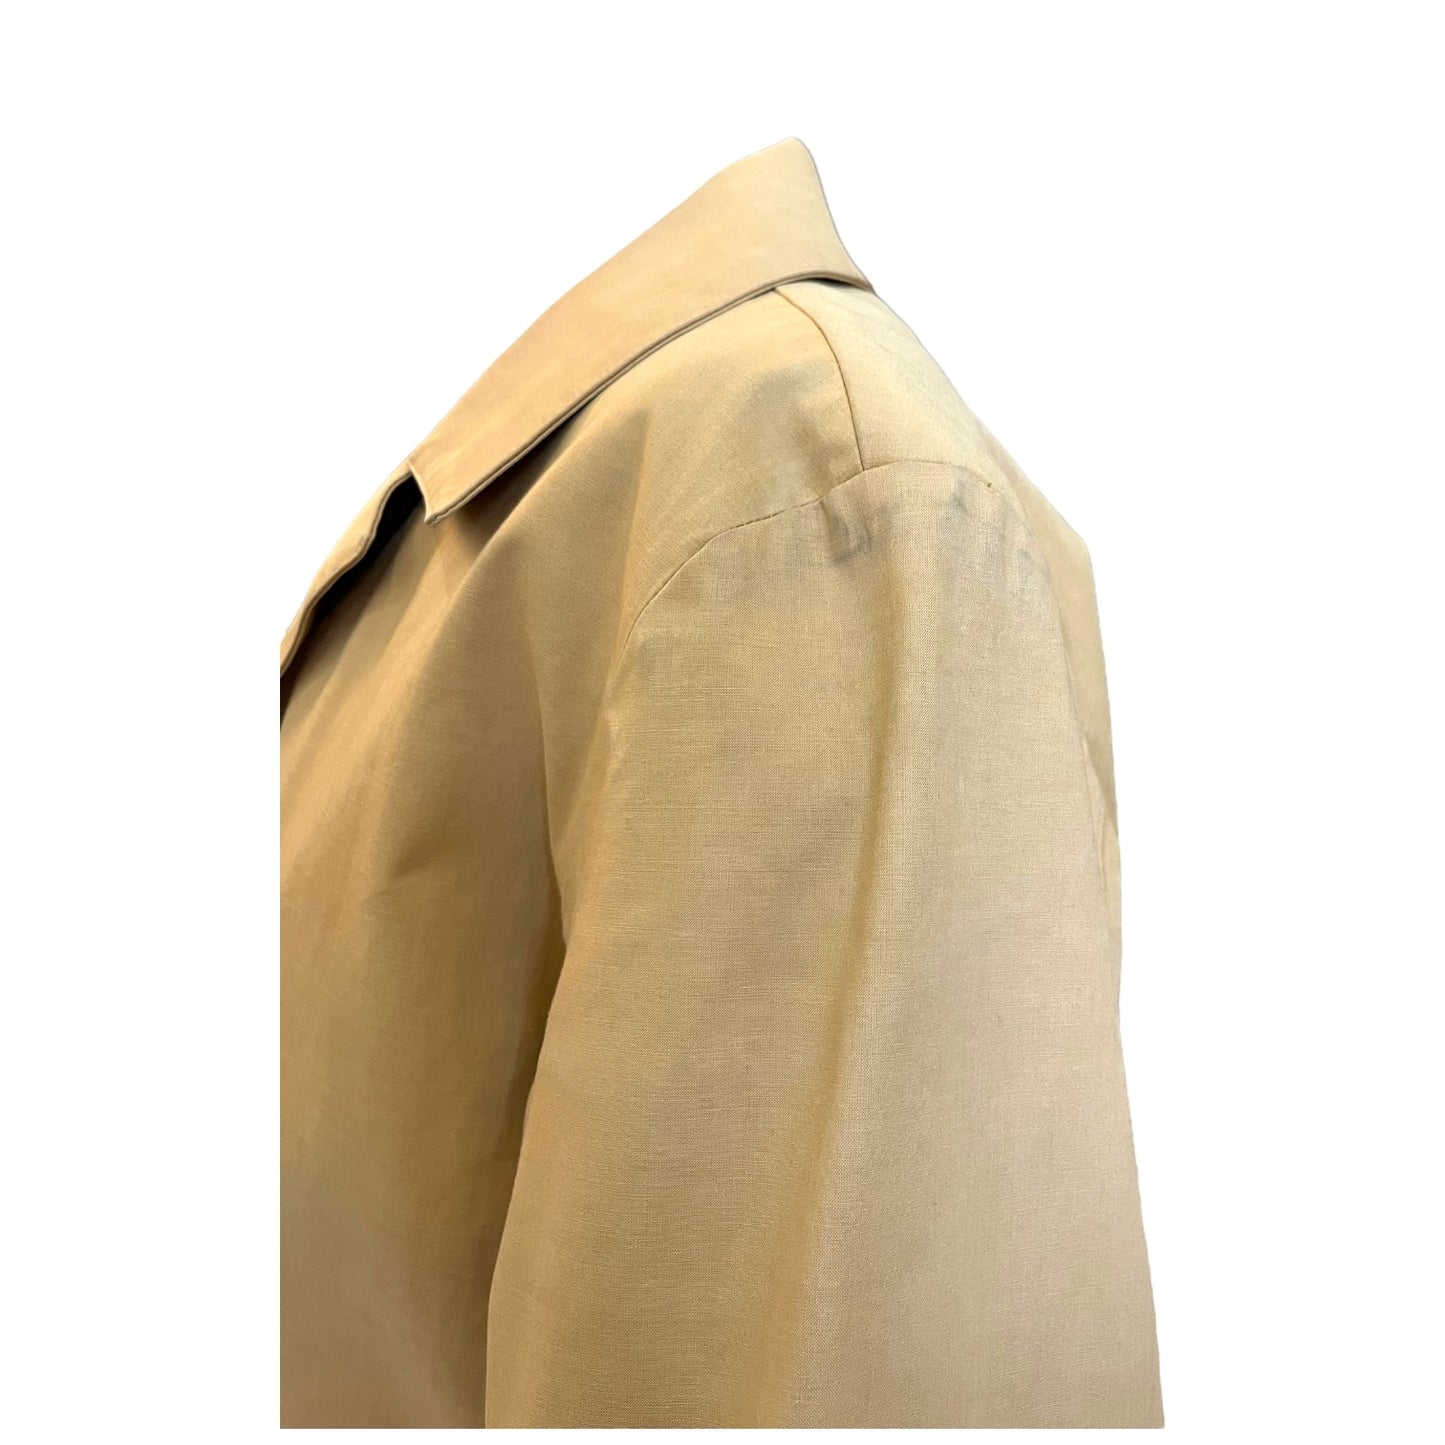 Mulberry Camel Trench Coat - 12